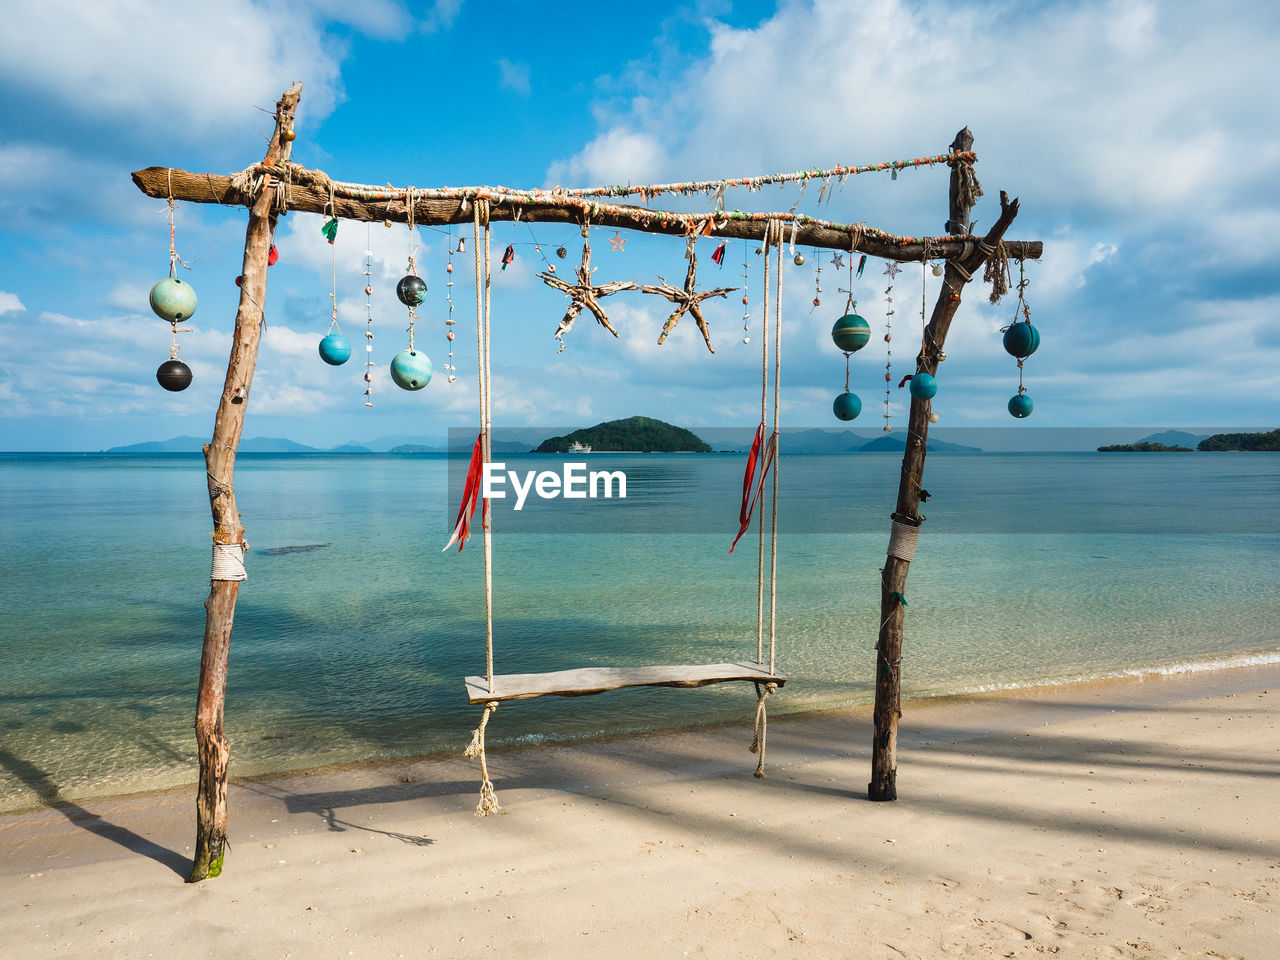 Scenic tropical island with wooden beach swing and turquoise sea. koh mak island, trat, thailand.